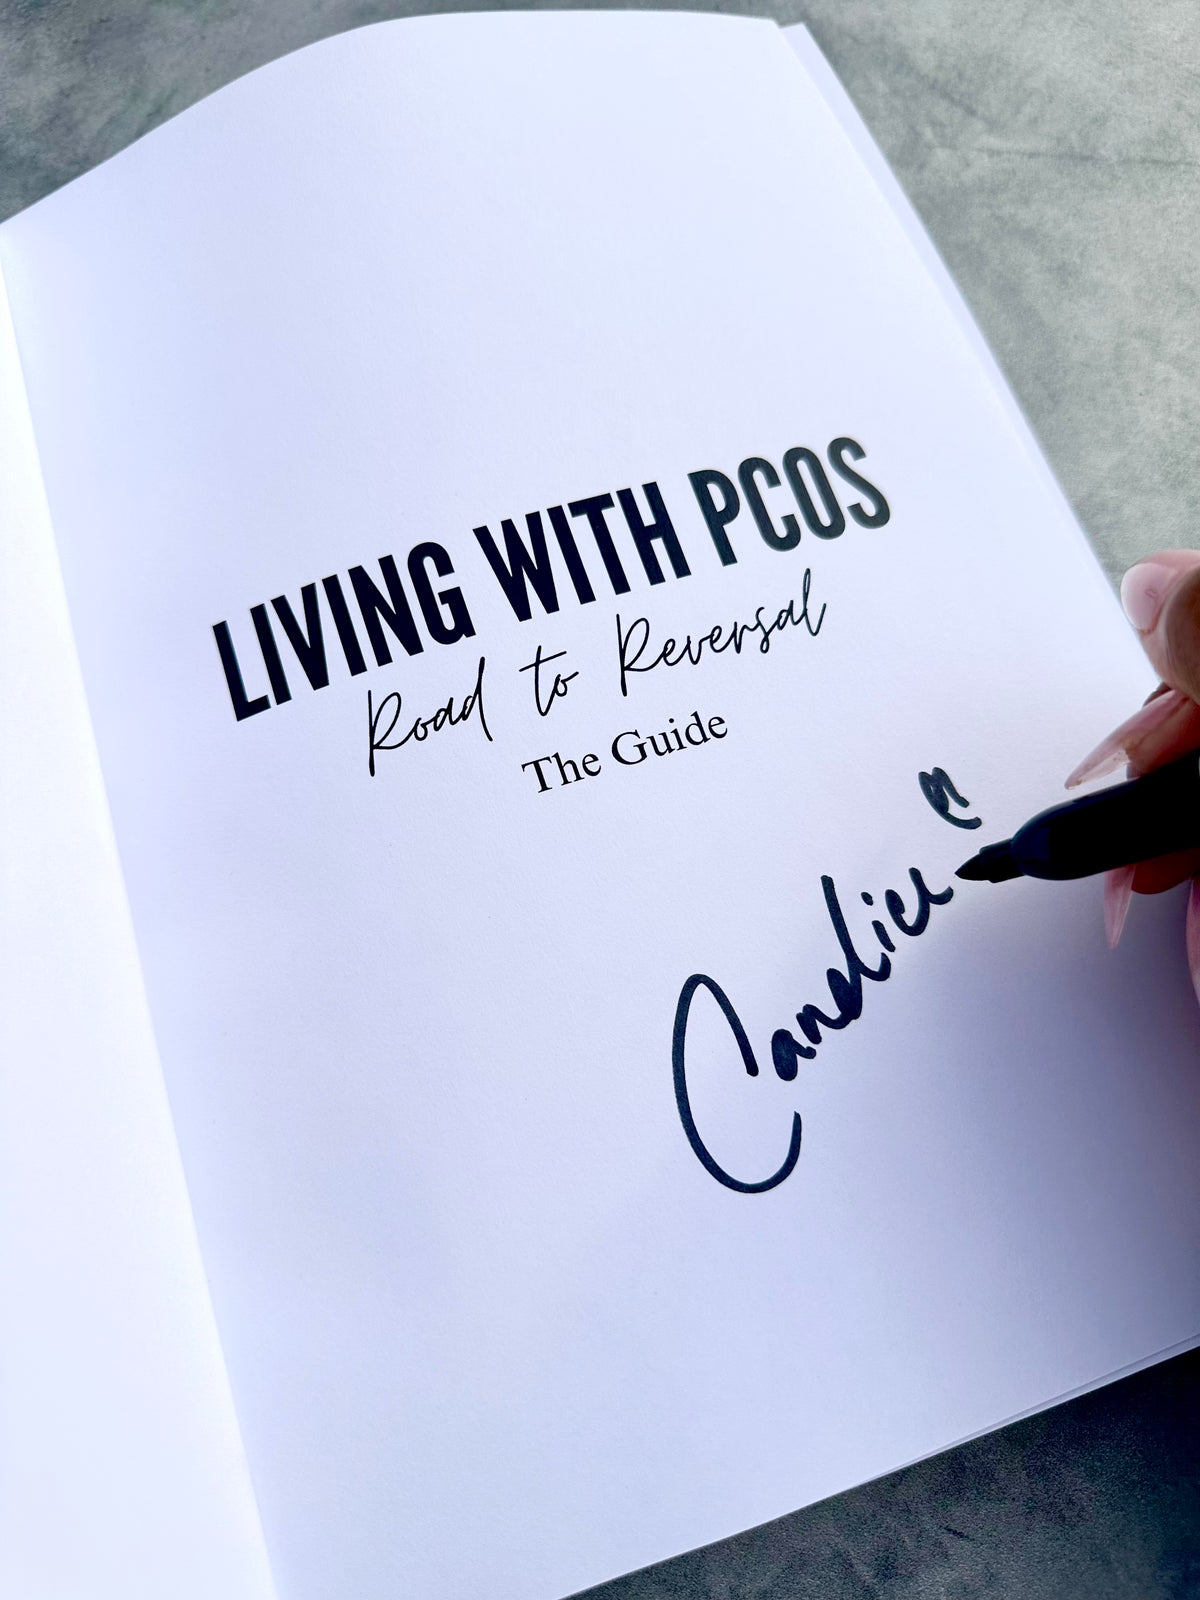 Hand written signature from Candice and Book Mark